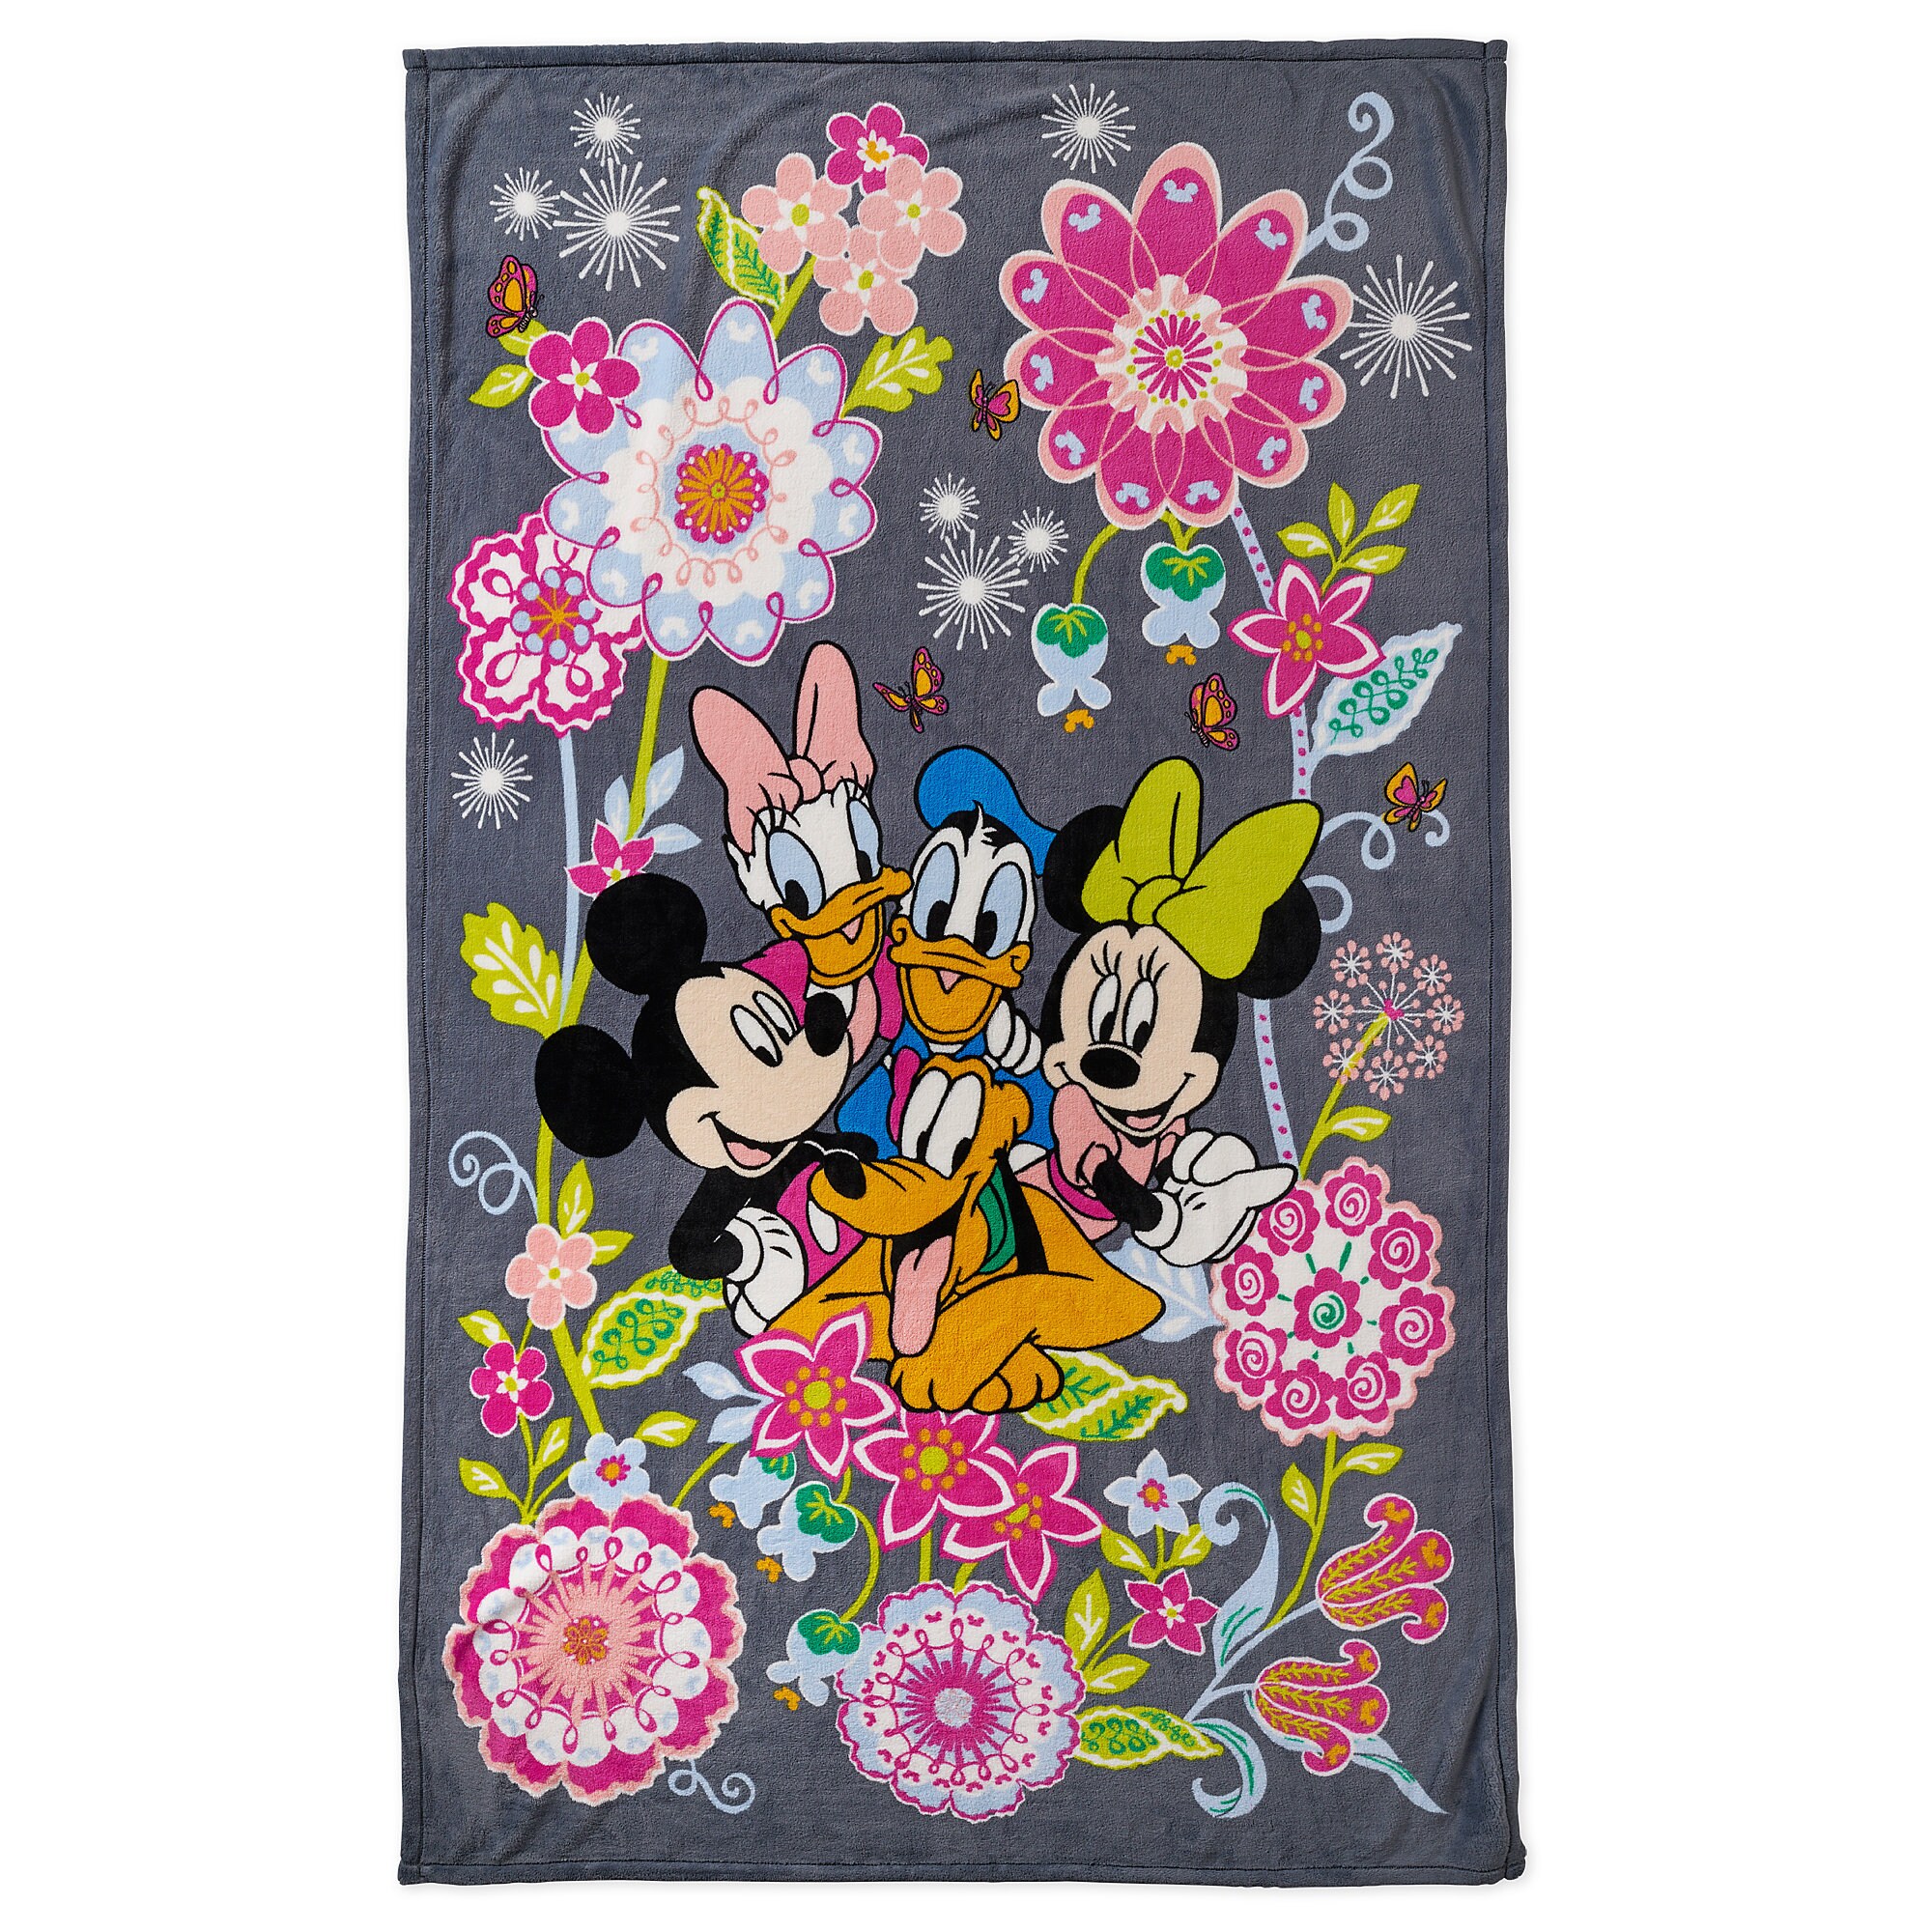 Mickey Mouse and Friends Throw Blanket by Vera Bradley